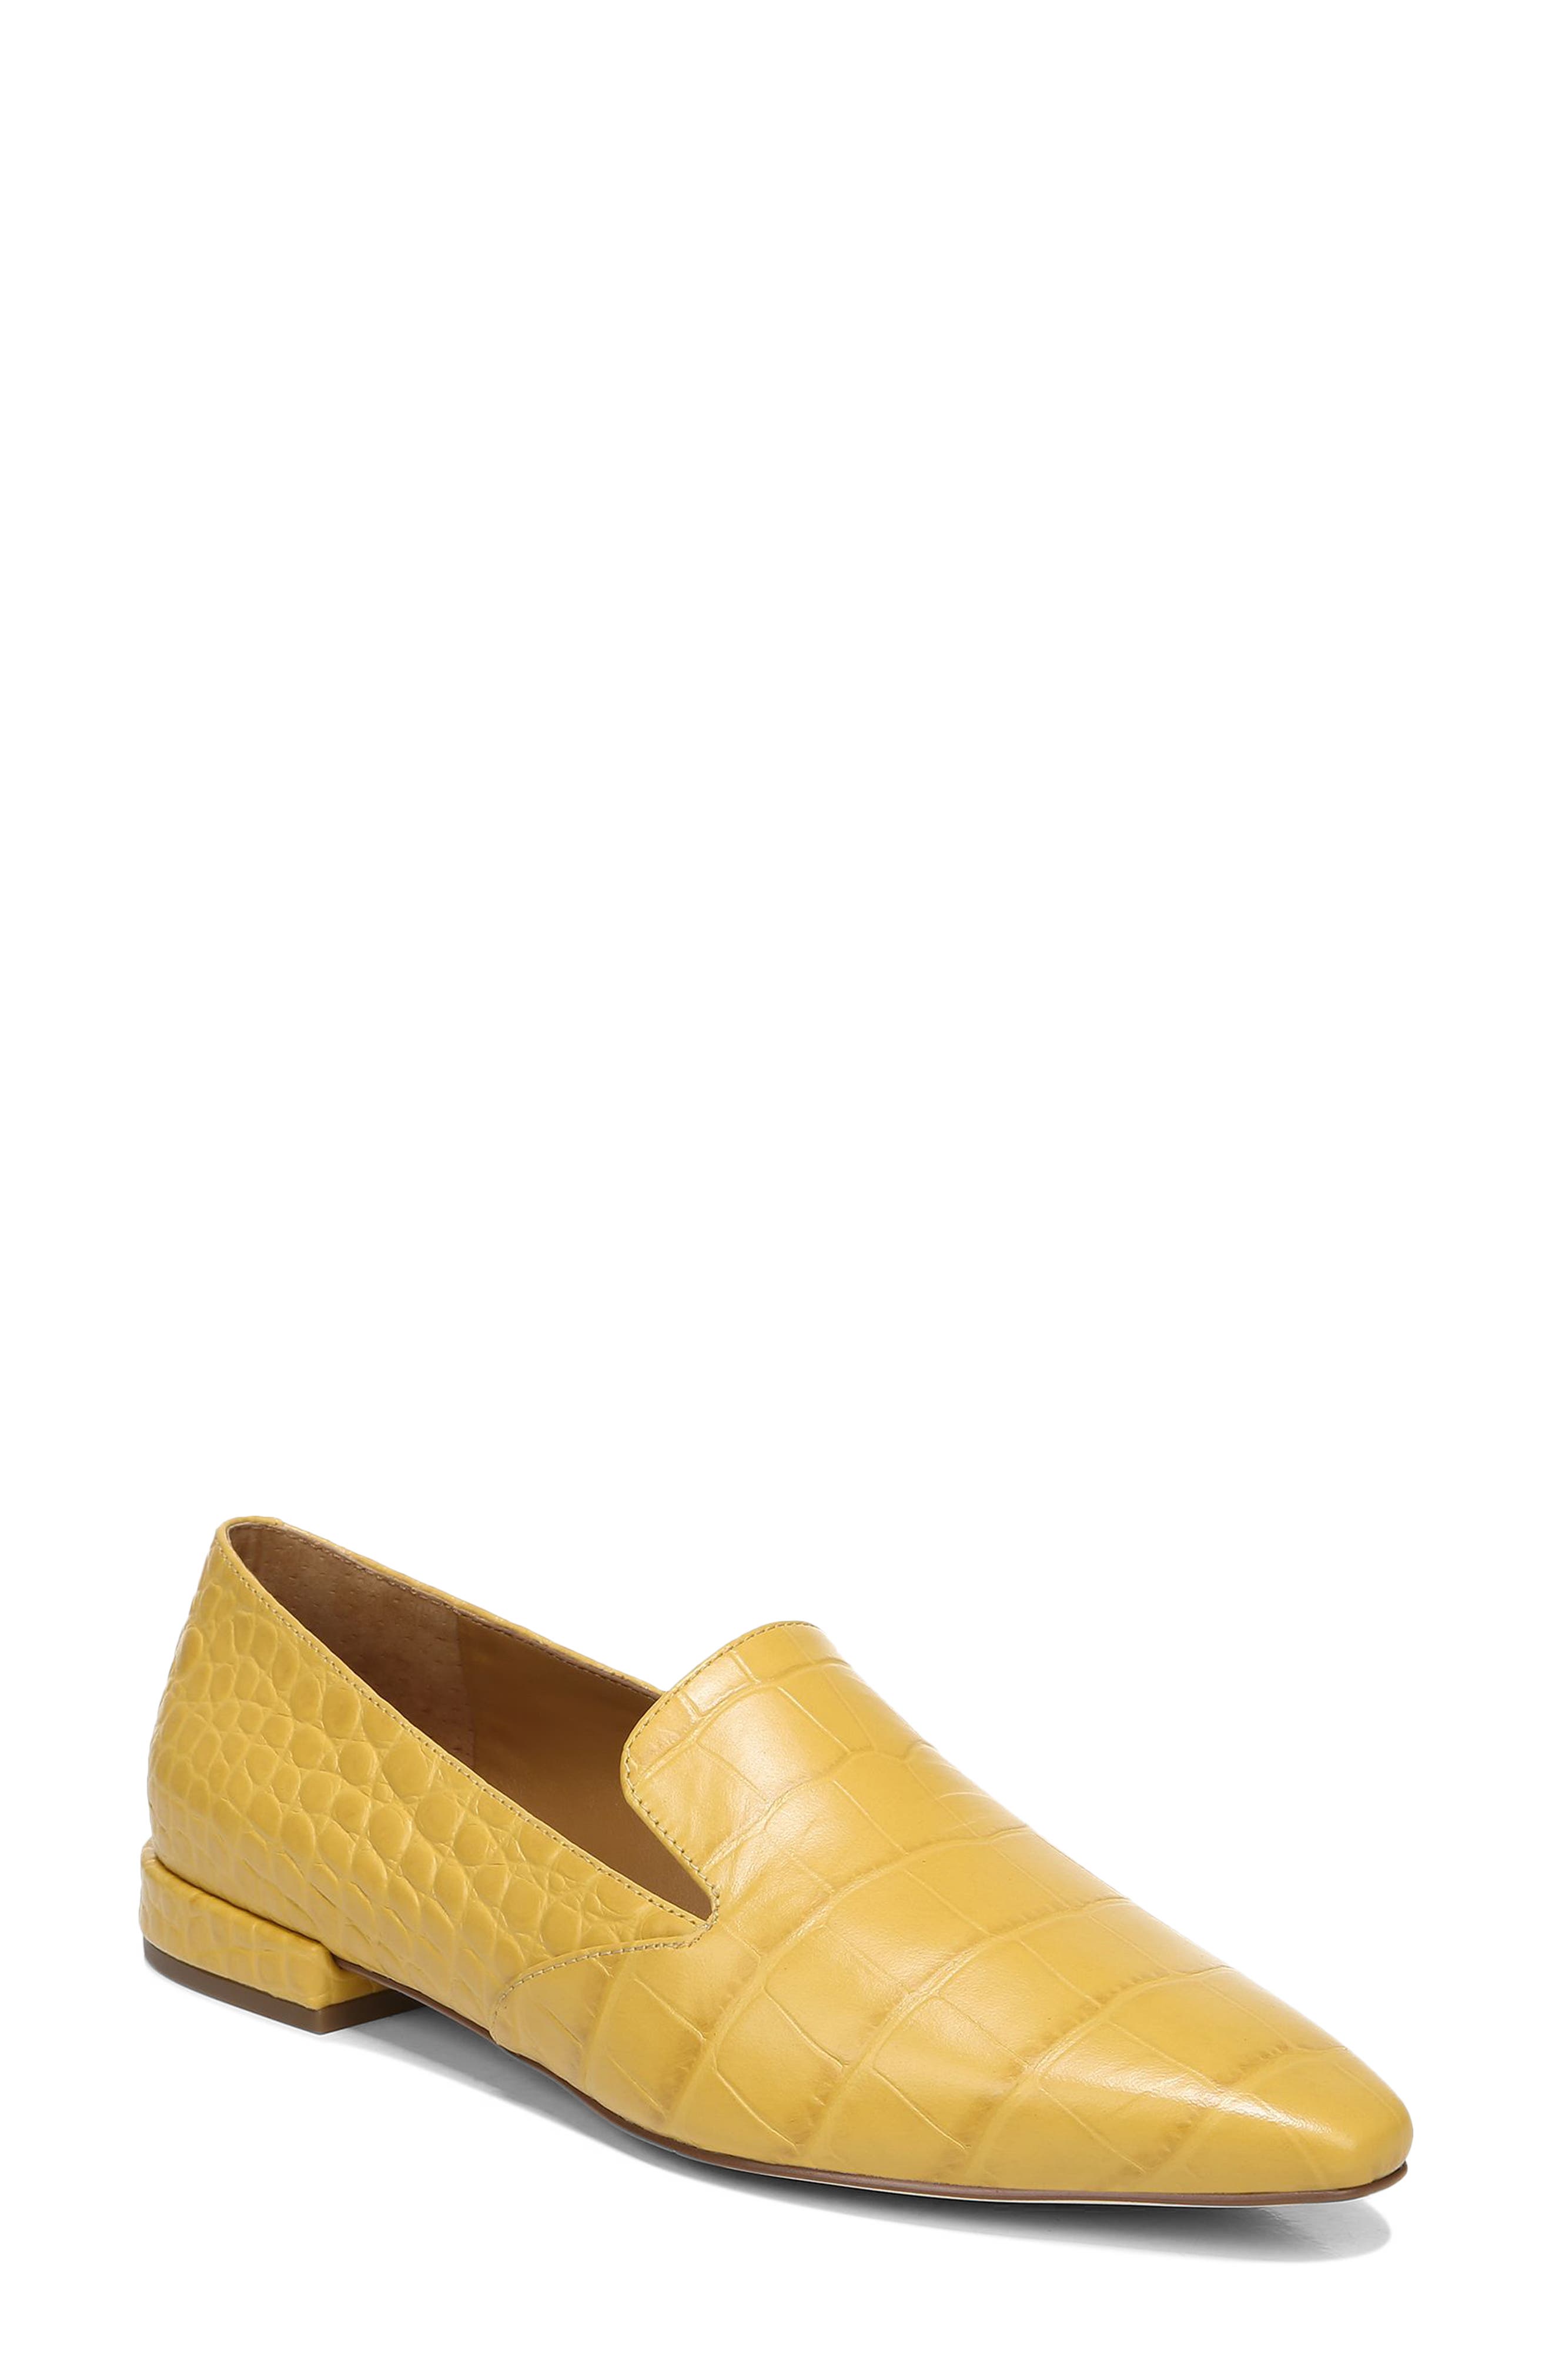 Women's Yellow Loafers \u0026 Oxfords 